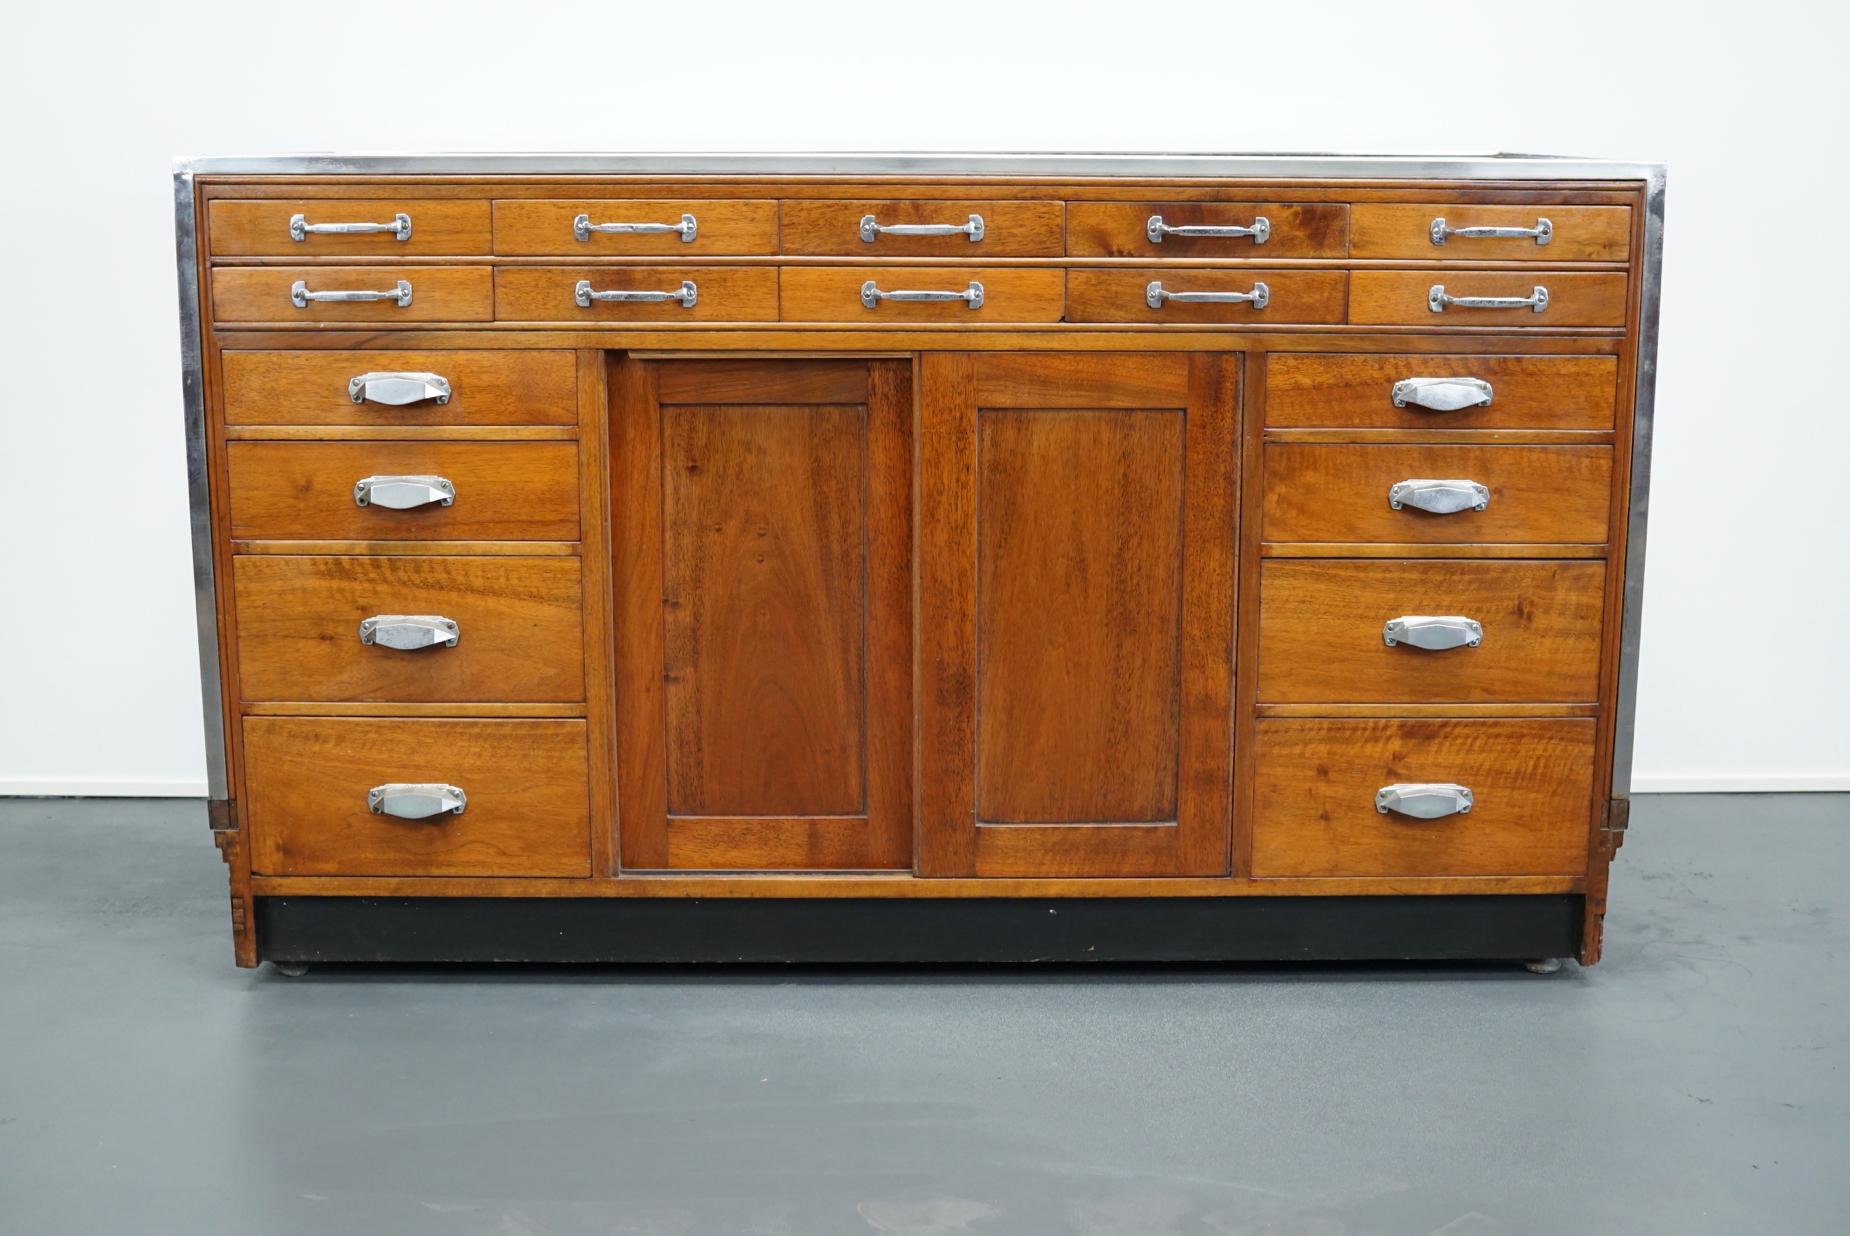 This vintage mahogany haberdashery shop counter with walnut veneer sides and palissander details dates from the 1930s and was made in England. It features a solid wooden frame and drawers in mahogany with art deco style handles.